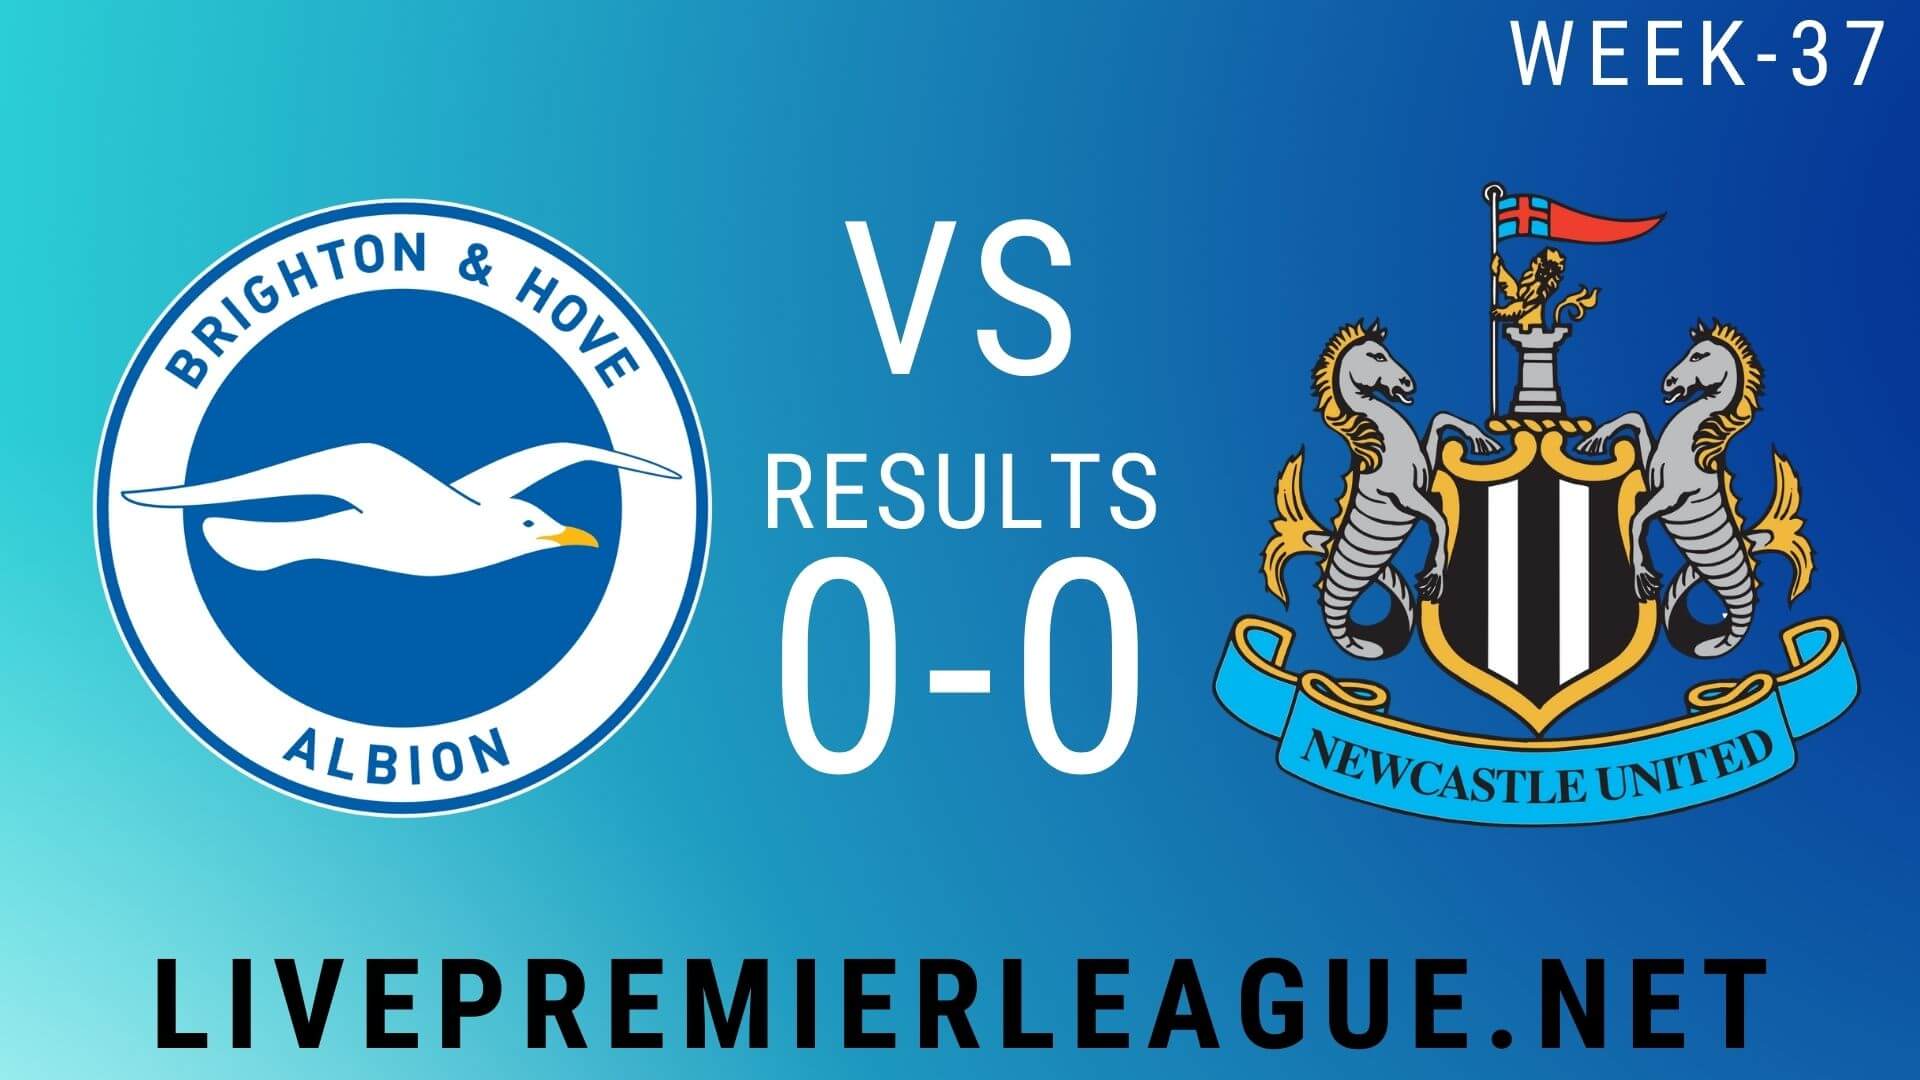 Brighton and Hove Albion Vs Newcastle United | Week 37 Result 2020